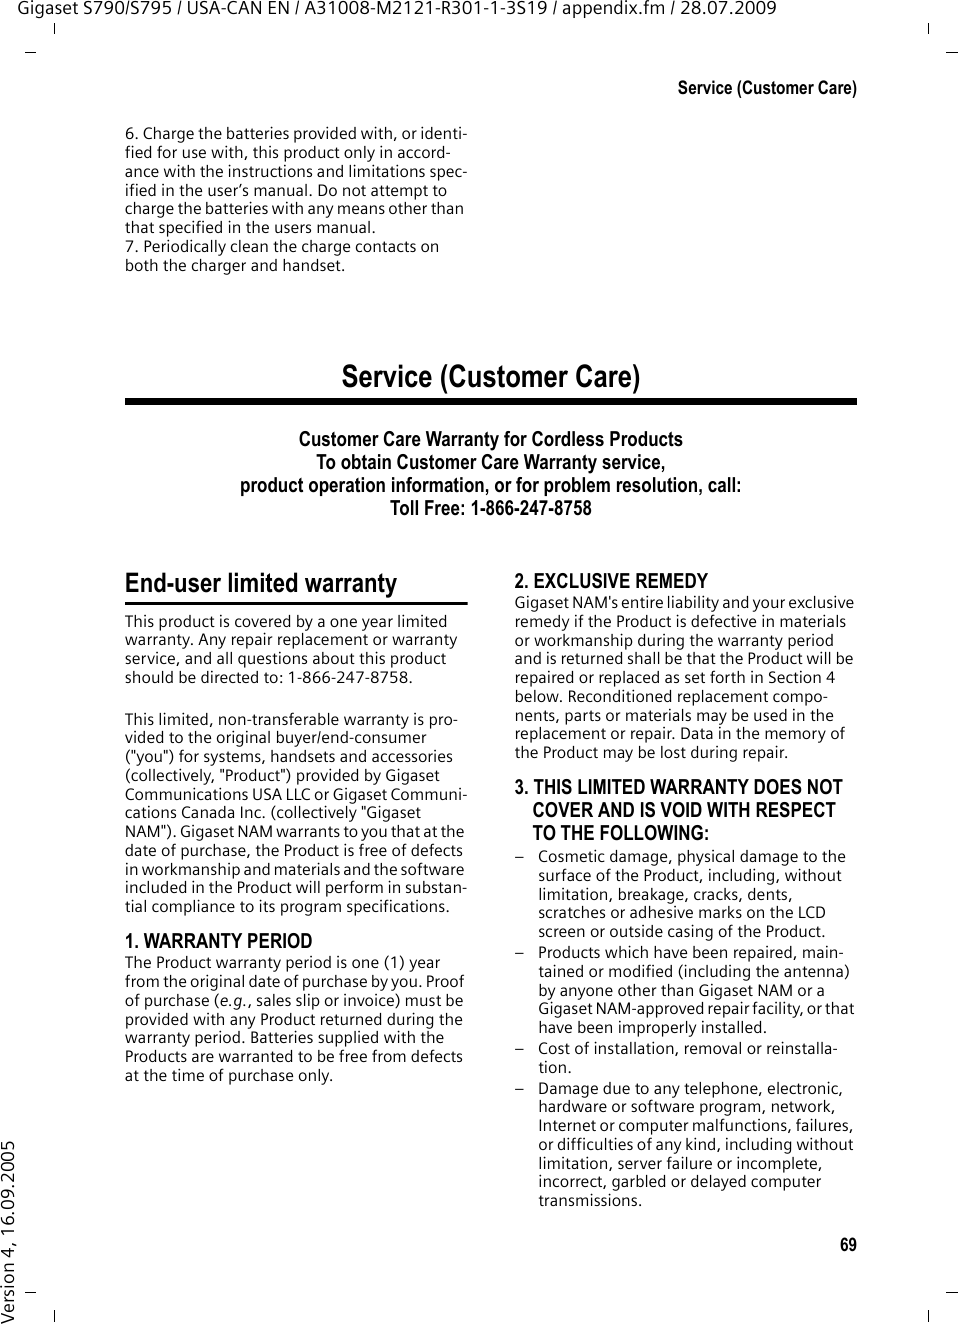 69Service (Customer Care)Gigaset S790/S795 / USA-CAN EN / A31008-M2121-R301-1-3S19 / appendix.fm / 28.07.2009Version 4, 16.09.20056. Charge the batteries provided with, or identi-fied for use with, this product only in accord-ance with the instructions and limitations spec-ified in the user’s manual. Do not attempt to charge the batteries with any means other than that specified in the users manual.7. Periodically clean the charge contacts on both the charger and handset.Service (Customer Care)Customer Care Warranty for Cordless ProductsTo obtain Customer Care Warranty service,product operation information, or for problem resolution, call:Toll Free: 1-866-247-8758End-user limited warrantyThis product is covered by a one year limited warranty. Any repair replacement or warranty service, and all questions about this product should be directed to: 1-866-247-8758.This limited, non-transferable warranty is pro-vided to the original buyer/end-consumer (&quot;you&quot;) for systems, handsets and accessories (collectively, &quot;Product&quot;) provided by Gigaset Communications USA LLC or Gigaset Communi-cations Canada Inc. (collectively &quot;Gigaset NAM&quot;). Gigaset NAM warrants to you that at the date of purchase, the Product is free of defects in workmanship and materials and the software included in the Product will perform in substan-tial compliance to its program specifications.1. WARRANTY PERIODThe Product warranty period is one (1) year from the original date of purchase by you. Proof of purchase (e.g., sales slip or invoice) must be provided with any Product returned during the warranty period. Batteries supplied with the Products are warranted to be free from defects at the time of purchase only.2. EXCLUSIVE REMEDYGigaset NAM&apos;s entire liability and your exclusive remedy if the Product is defective in materials or workmanship during the warranty period and is returned shall be that the Product will be repaired or replaced as set forth in Section 4 below. Reconditioned replacement compo-nents, parts or materials may be used in the replacement or repair. Data in the memory of the Product may be lost during repair.3. THIS LIMITED WARRANTY DOES NOT COVER AND IS VOID WITH RESPECT TO THE FOLLOWING:– Cosmetic damage, physical damage to the surface of the Product, including, without limitation, breakage, cracks, dents, scratches or adhesive marks on the LCD screen or outside casing of the Product.– Products which have been repaired, main-tained or modified (including the antenna) by anyone other than Gigaset NAM or a Gigaset NAM-approved repair facility, or that have been improperly installed. – Cost of installation, removal or reinstalla-tion.– Damage due to any telephone, electronic, hardware or software program, network, Internet or computer malfunctions, failures, or difficulties of any kind, including without limitation, server failure or incomplete, incorrect, garbled or delayed computer transmissions.